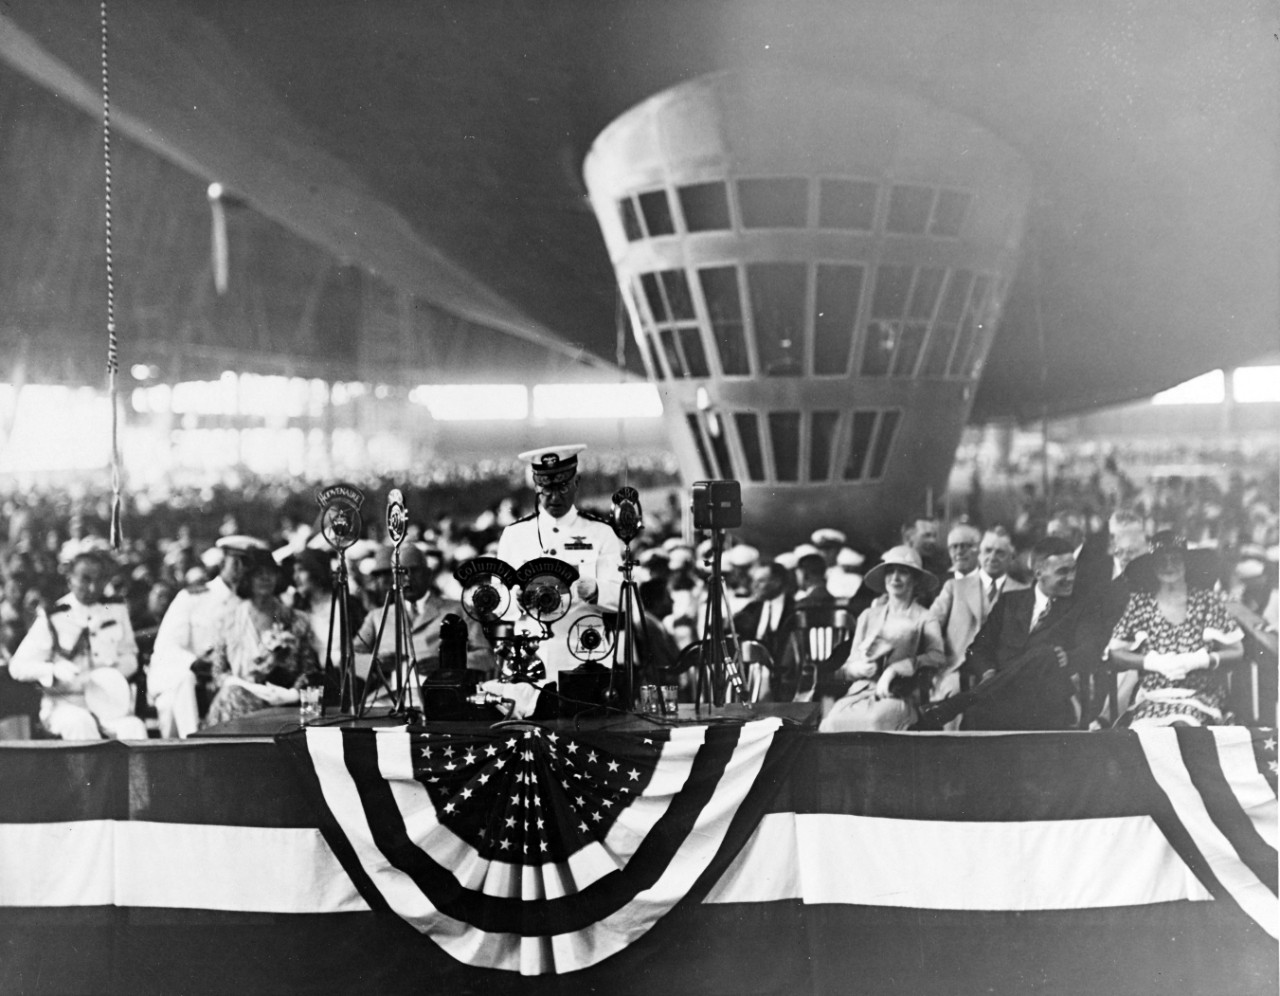 Photo #: NH 42159  Christening of USS Akron (ZRS-4), 8 August 1931